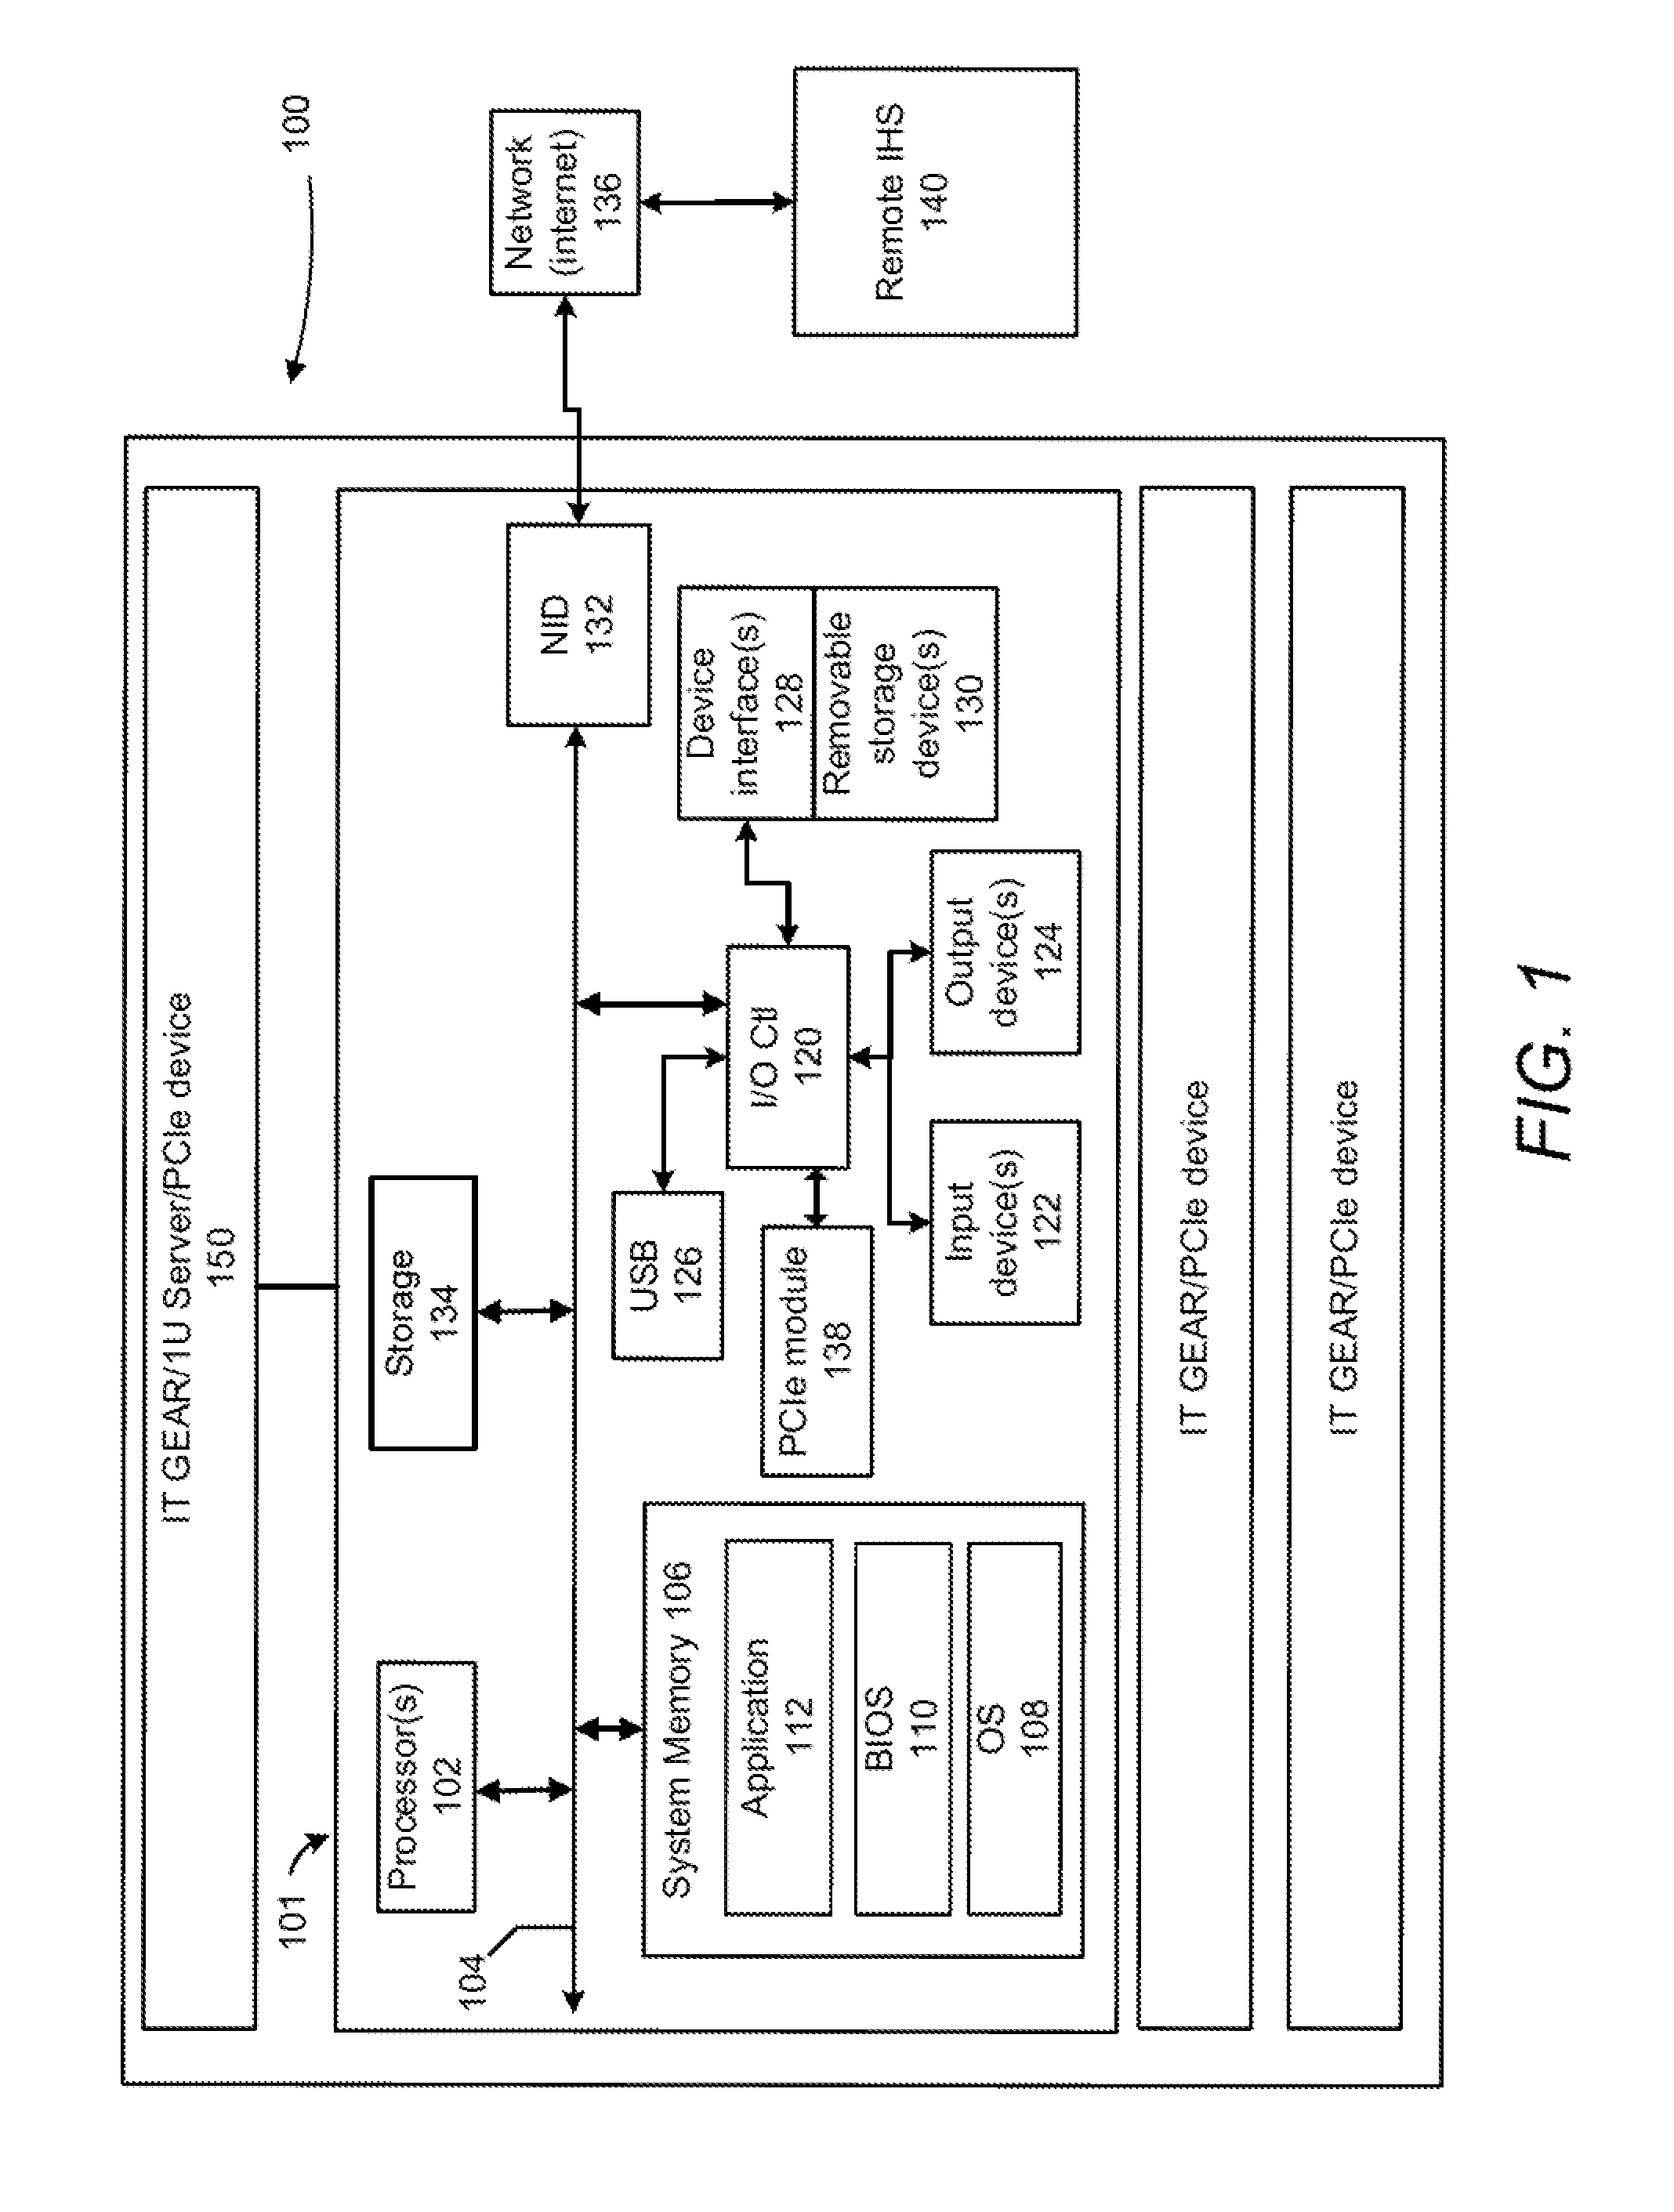 Dense peripheral component interconnect express (PCIE) card mounting and interconnect method